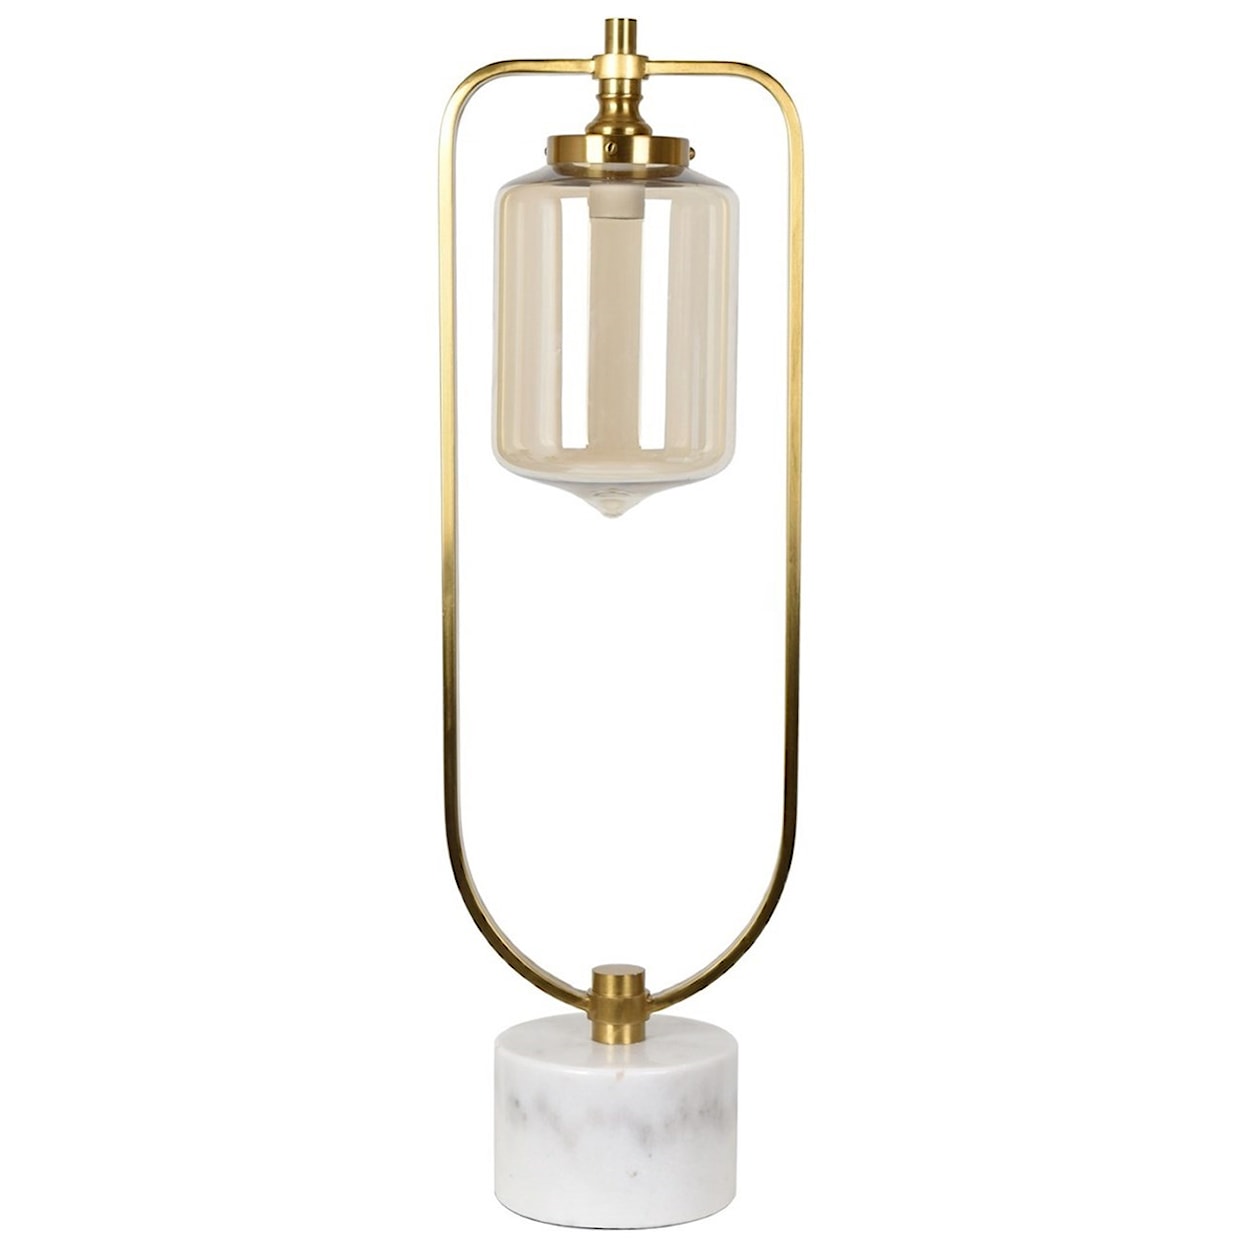 Crestview Collection Lighting Barclay Uplight